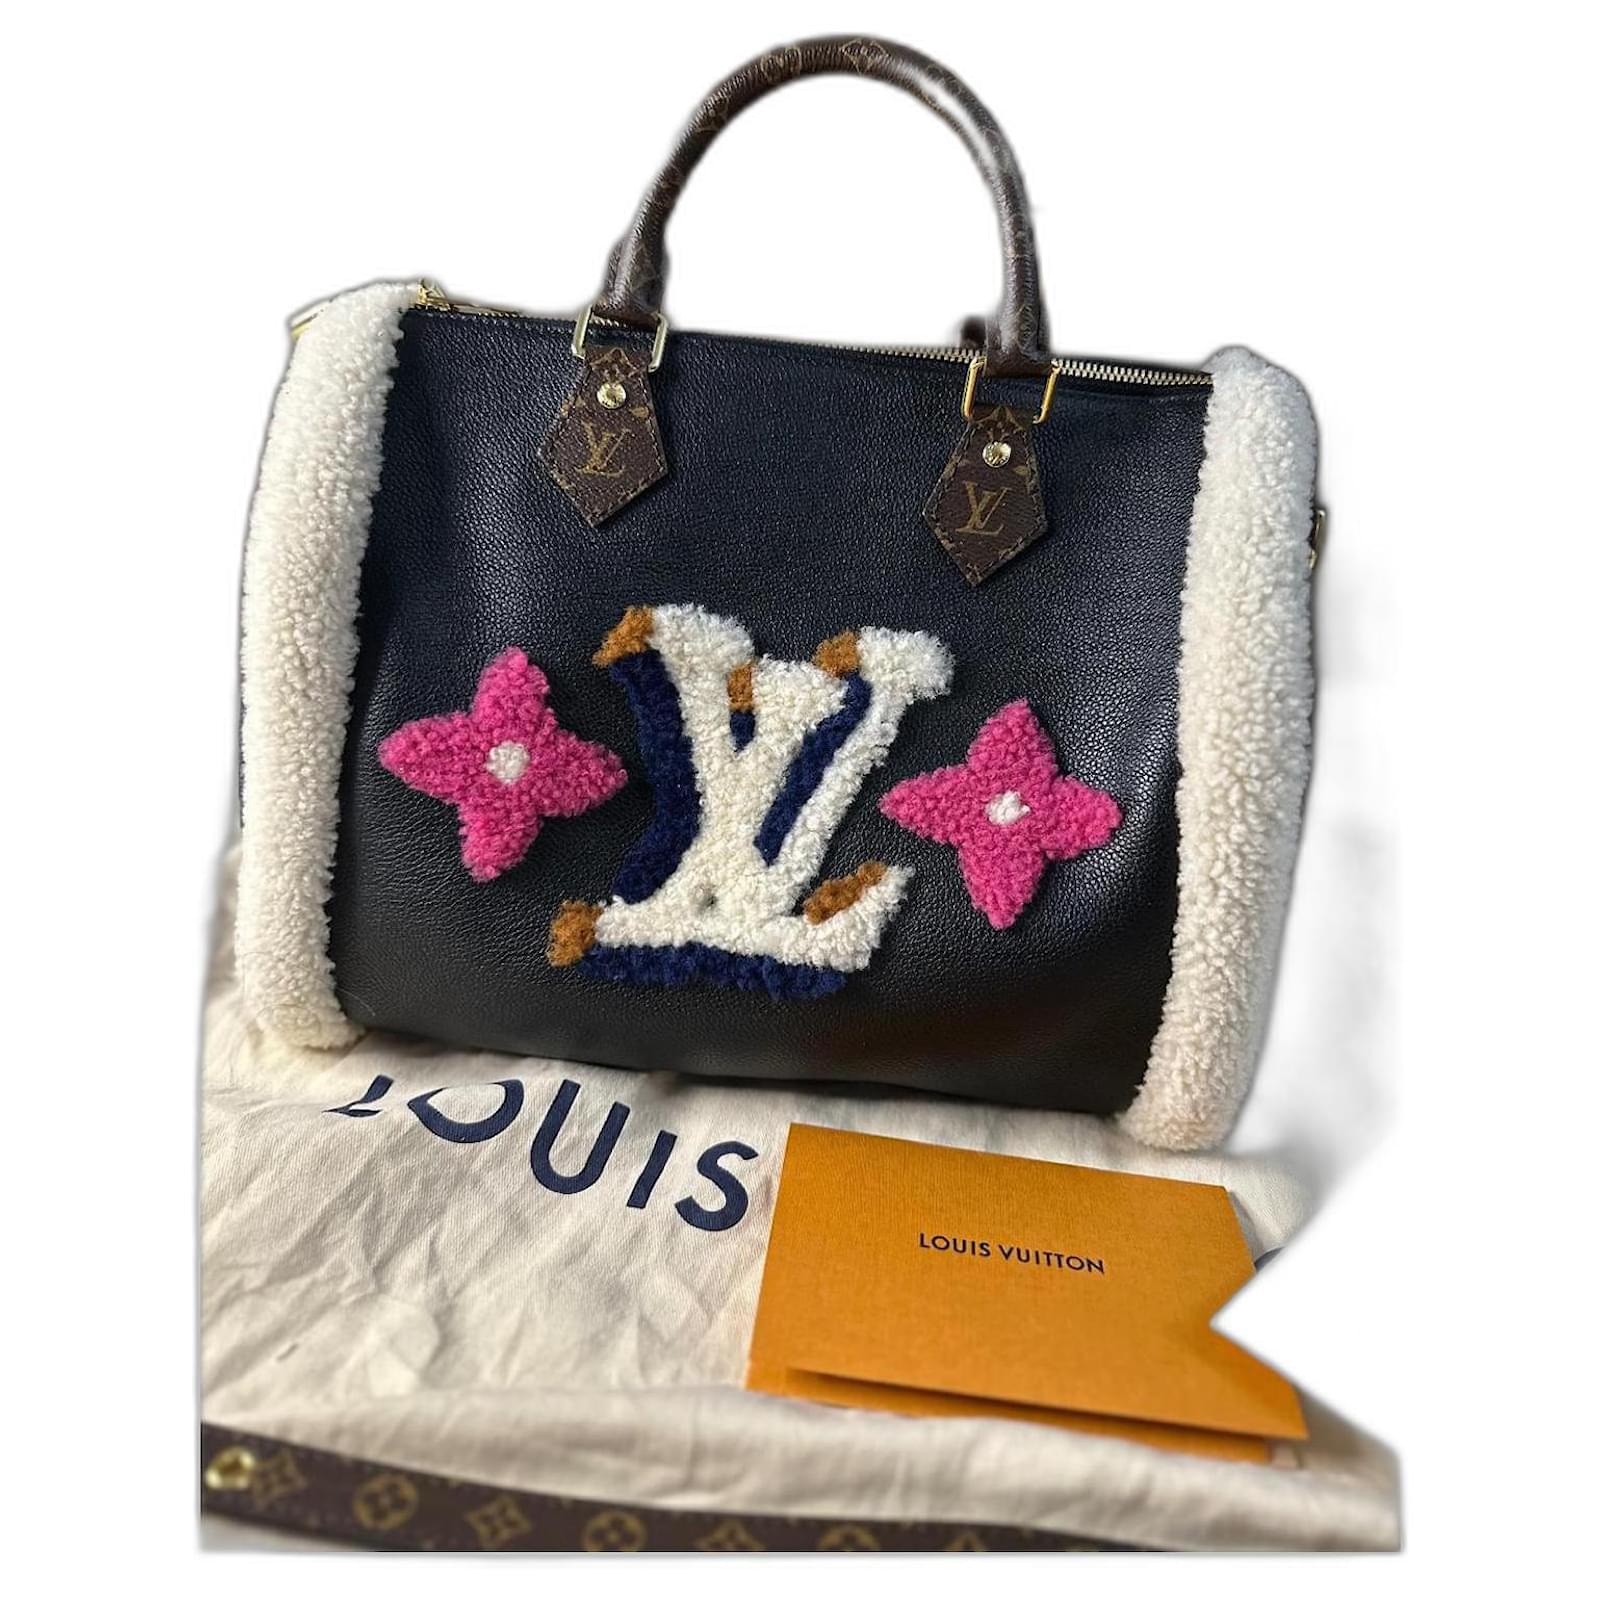 Authentic Limited Edition Louis Vuitton Speedy Bandouliere 30